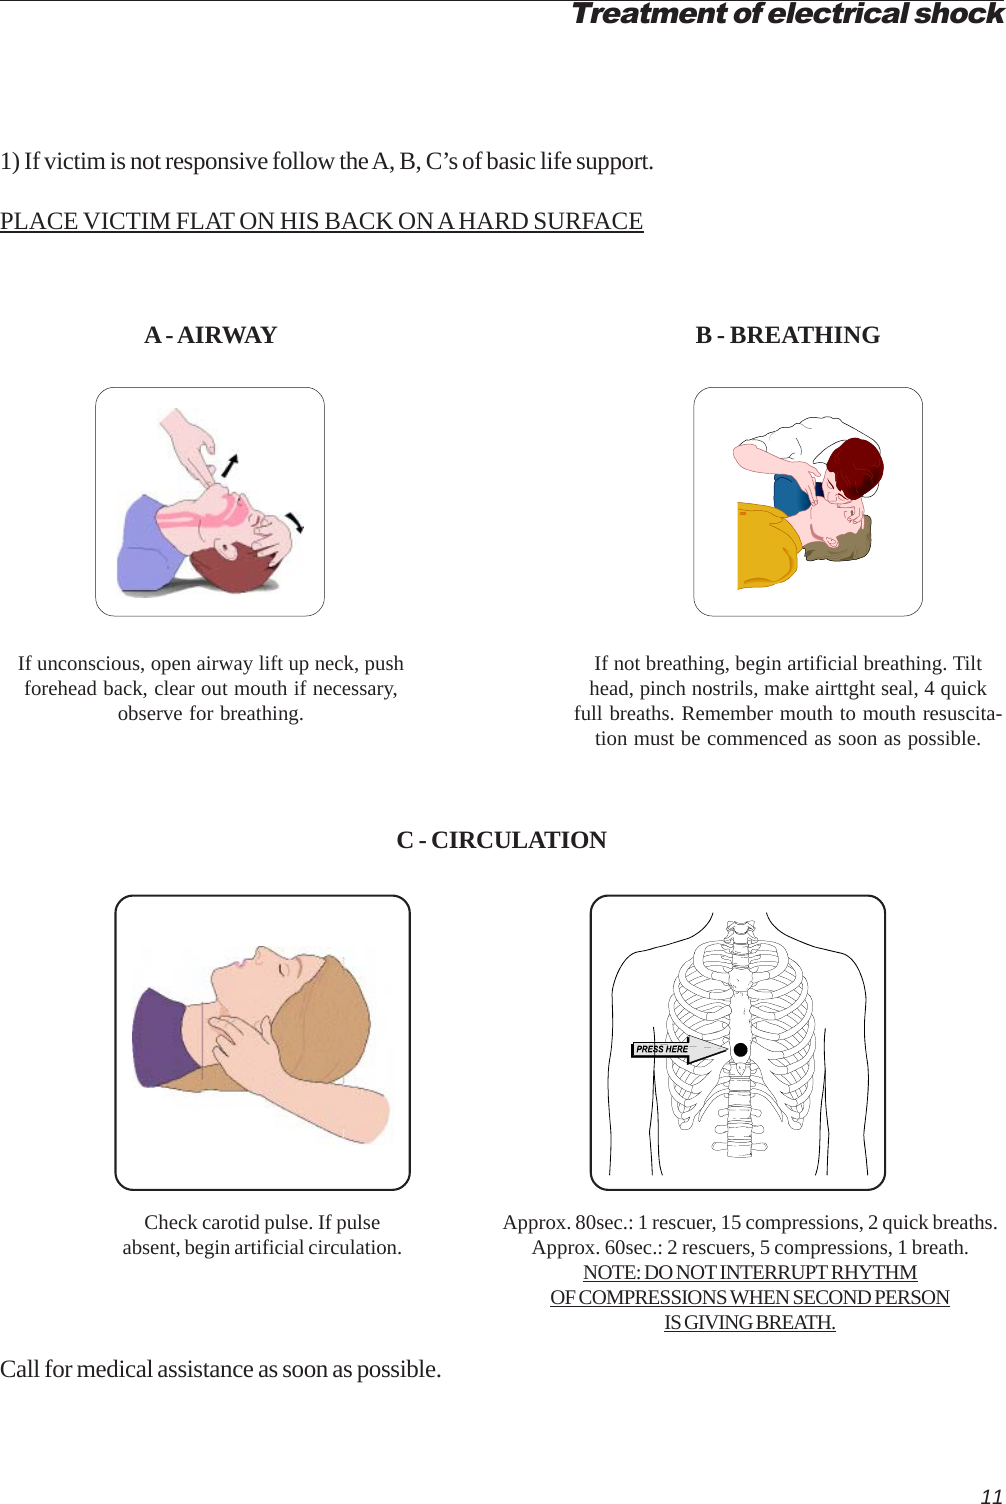 11A - AIRWAYIf unconscious, open airway lift up neck, pushforehead back, clear out mouth if necessary,observe for breathing.Treatment of electrical shock1) If victim is not responsive follow the A, B, C’s of basic life support.PLACE VICTIM FLAT ON HIS BACK ON A HARD SURFACEB - BREATHINGIf not breathing, begin artificial breathing. Tilthead, pinch nostrils, make airttght seal, 4 quickfull breaths. Remember mouth to mouth resuscita-tion must be commenced as soon as possible.C - CIRCULATIONCheck carotid pulse. If pulseabsent, begin artificial circulation. Approx. 80sec.: 1 rescuer, 15 compressions, 2 quick breaths.Approx. 60sec.: 2 rescuers, 5 compressions, 1 breath.NOTE: DO NOT INTERRUPT RHYTHMOF COMPRESSIONS WHEN SECOND PERSONIS GIVING BREATH.Call for medical assistance as soon as possible.